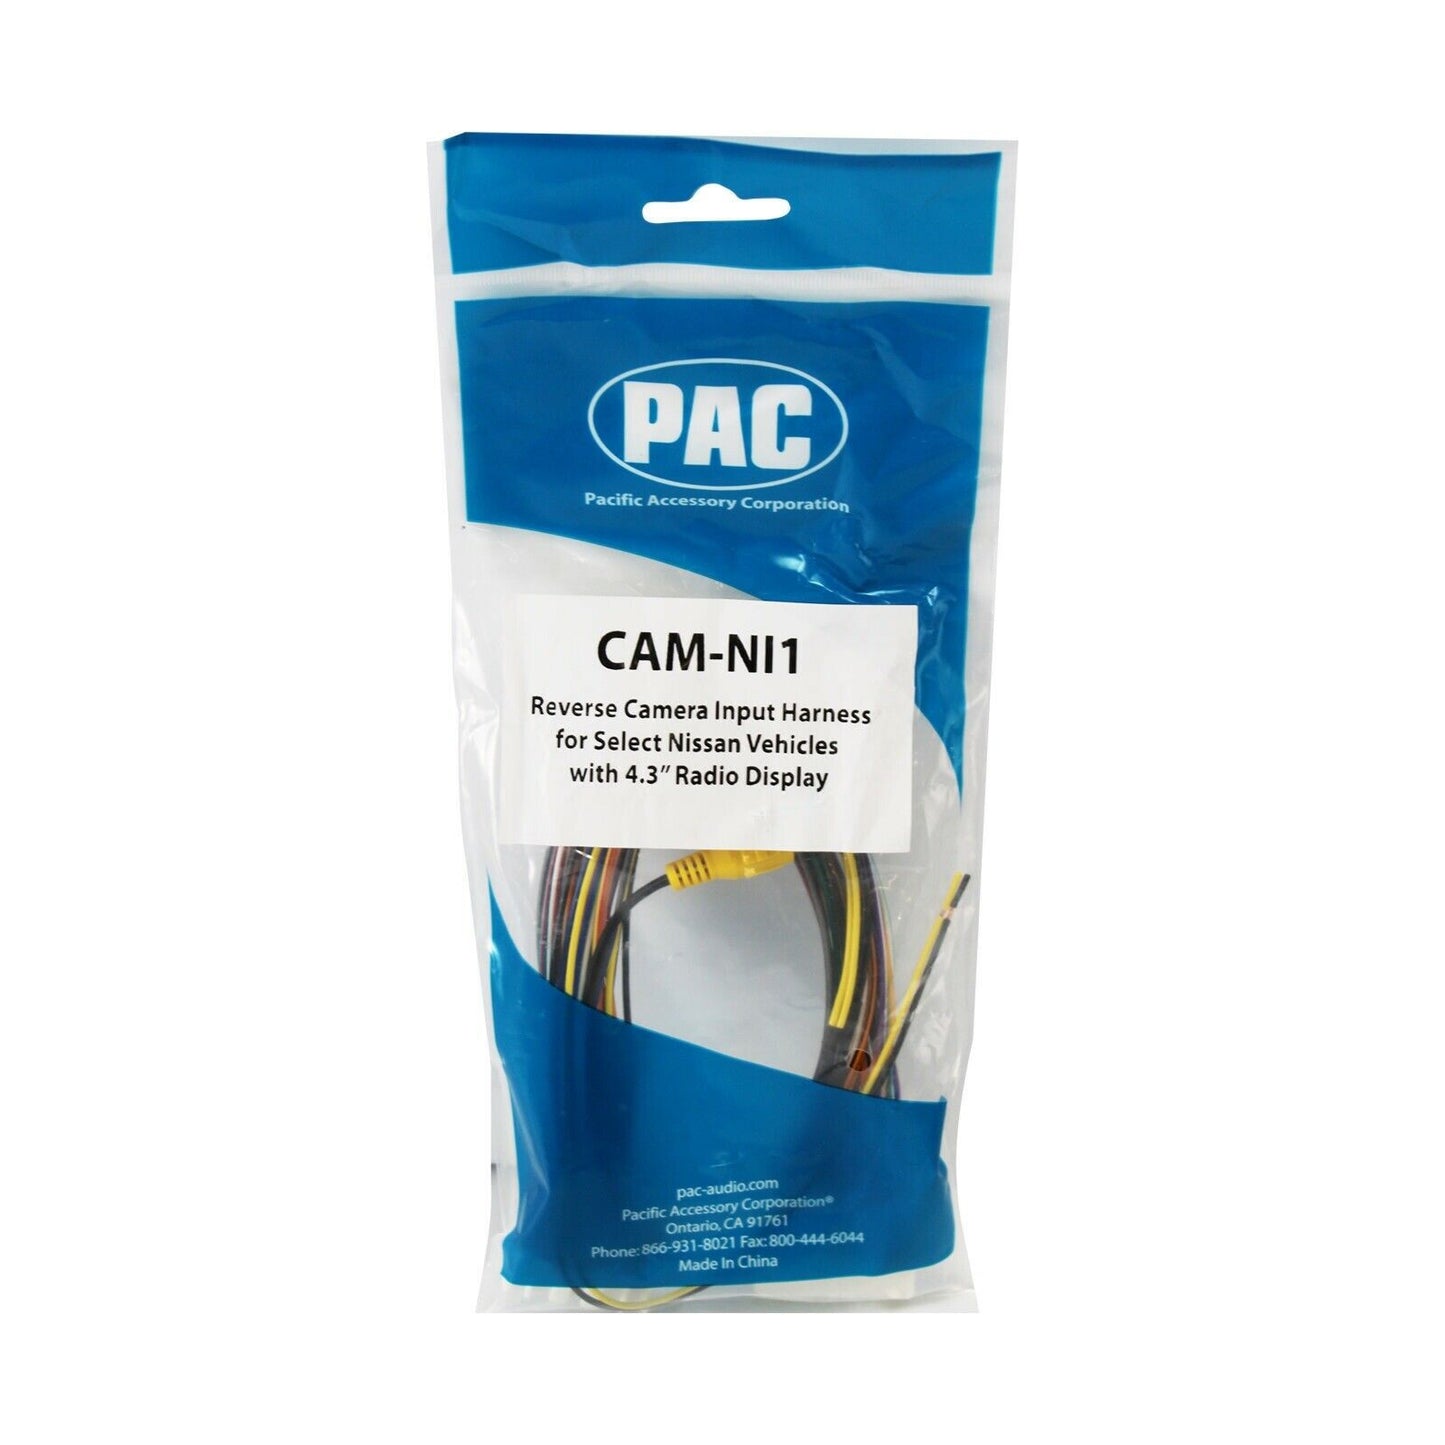 PAC CAM-NI1 Backup Camera T-Harness for Rear View Fits Nissan with 4.3" Display